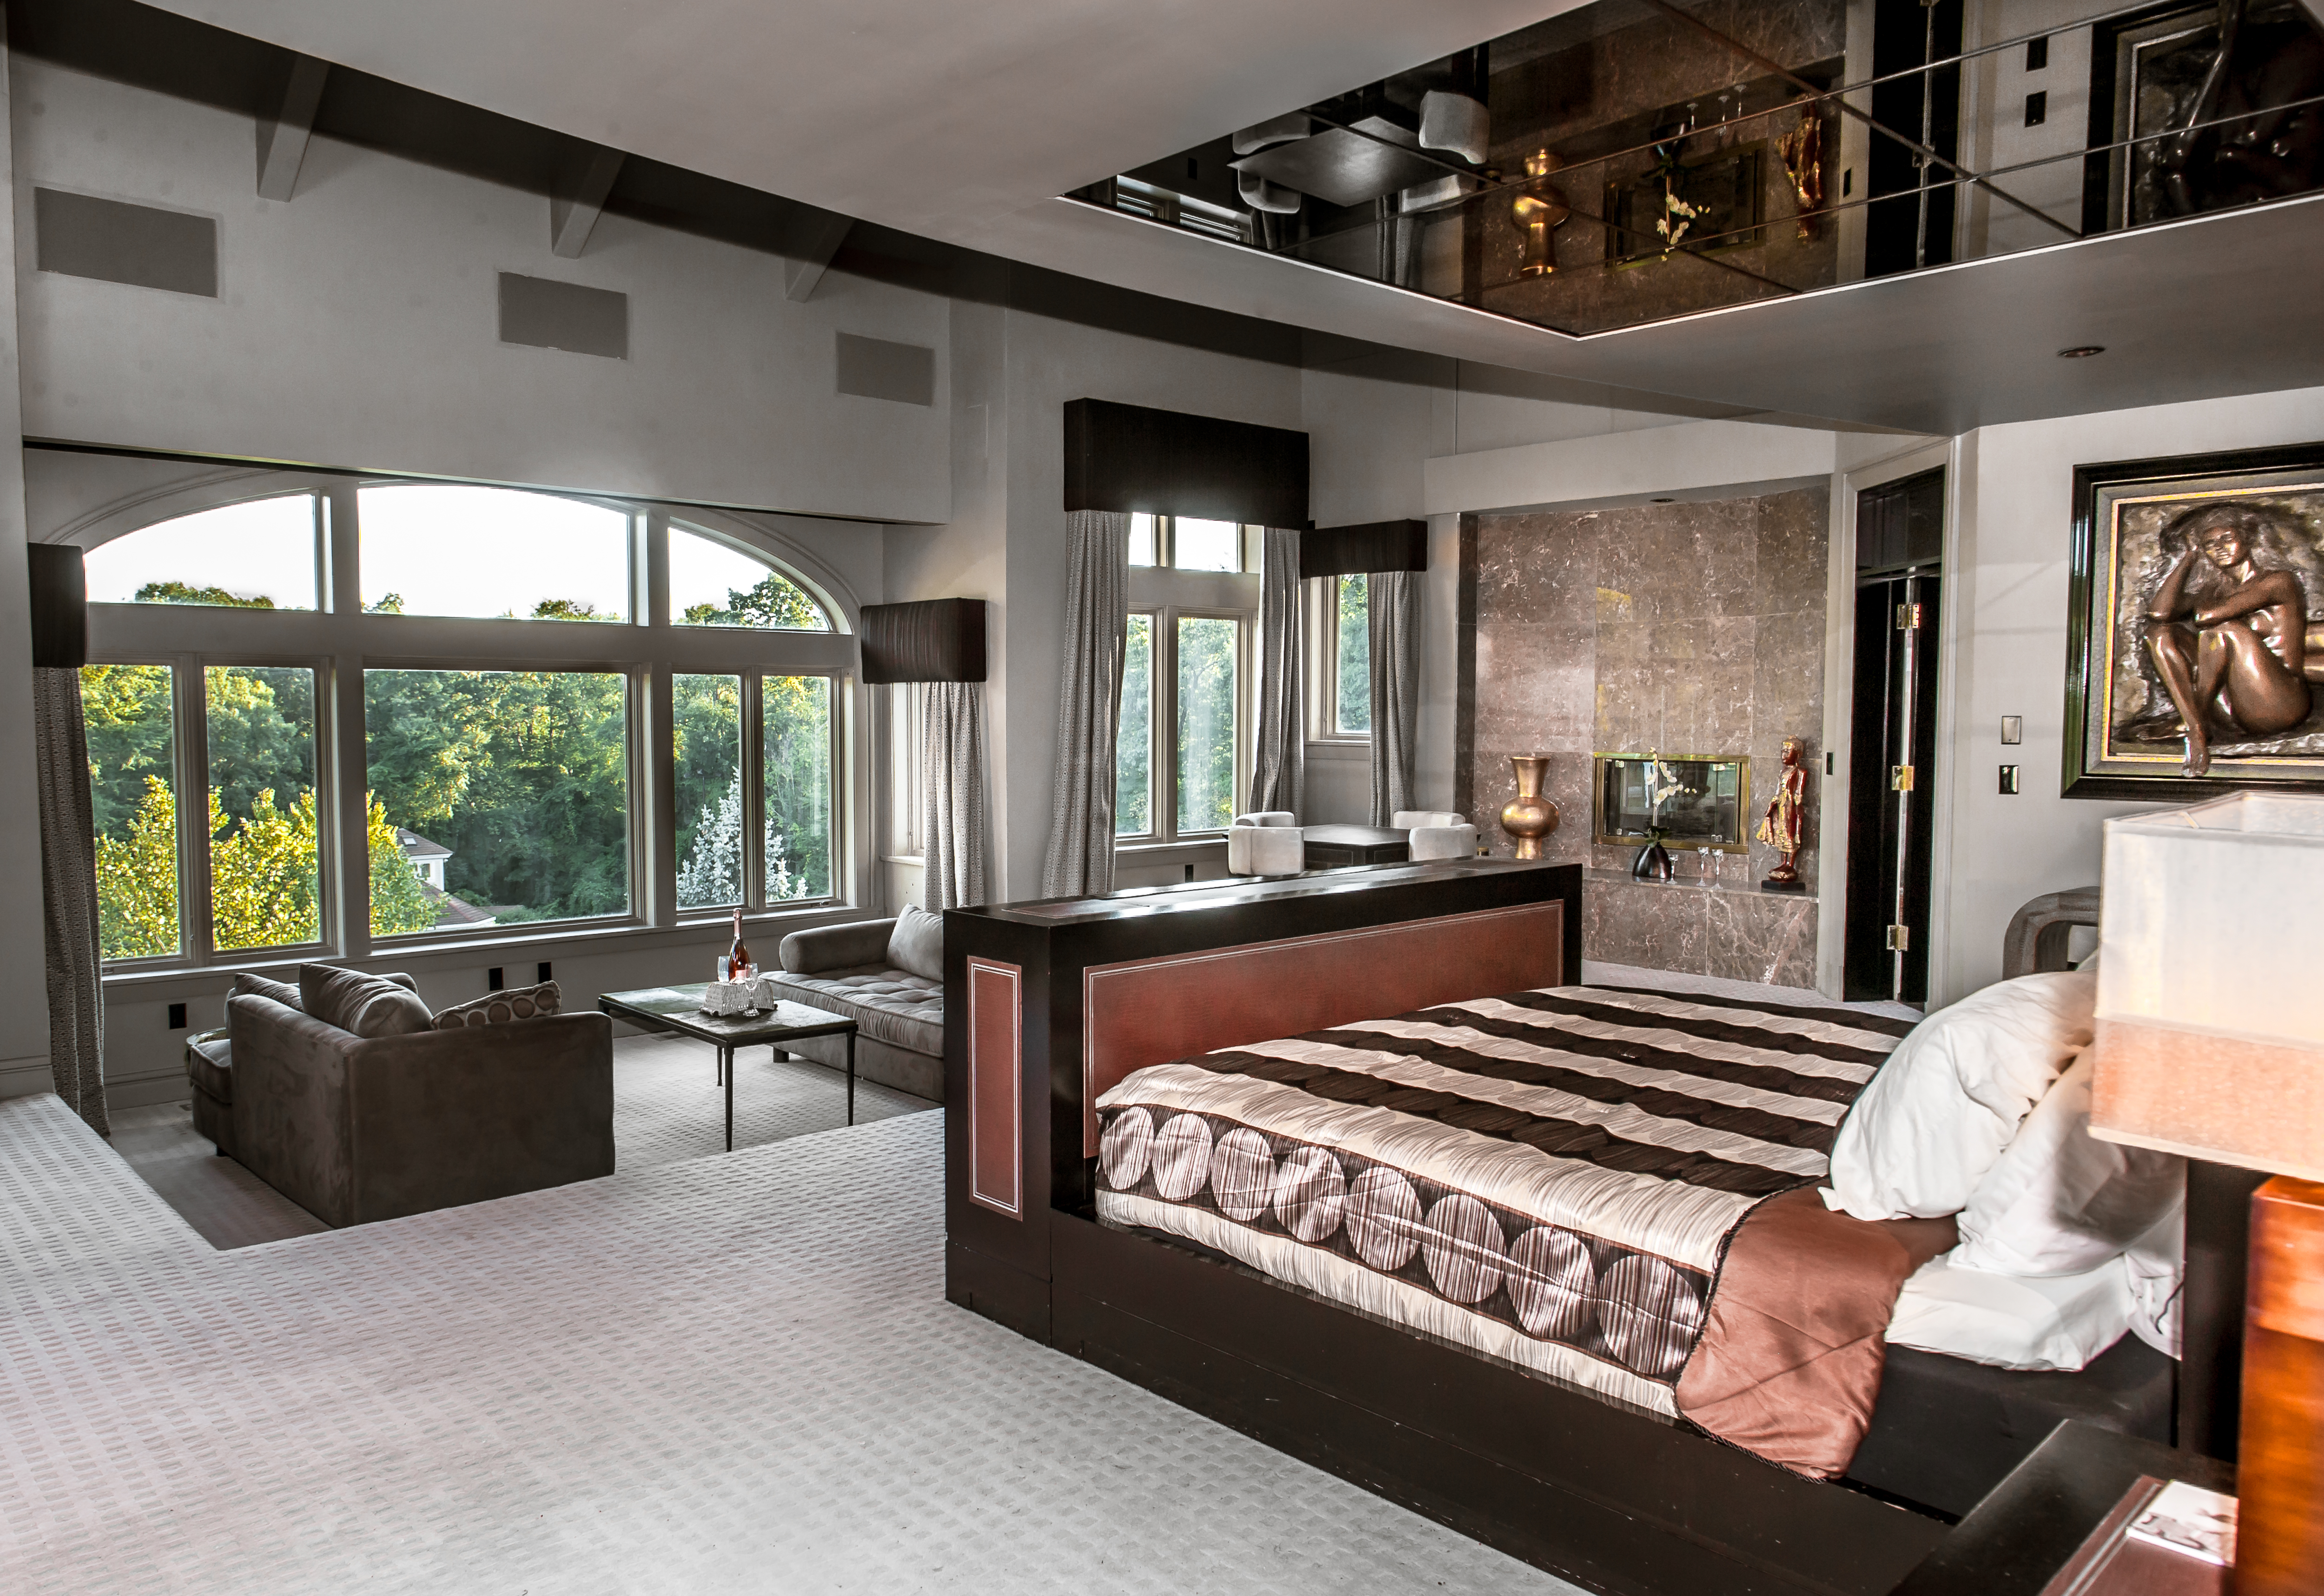 Amid Financial Woes, 50 Cent’s Conn. Mansion is Up for Sale | RISMedia's Housecall5000 x 3433